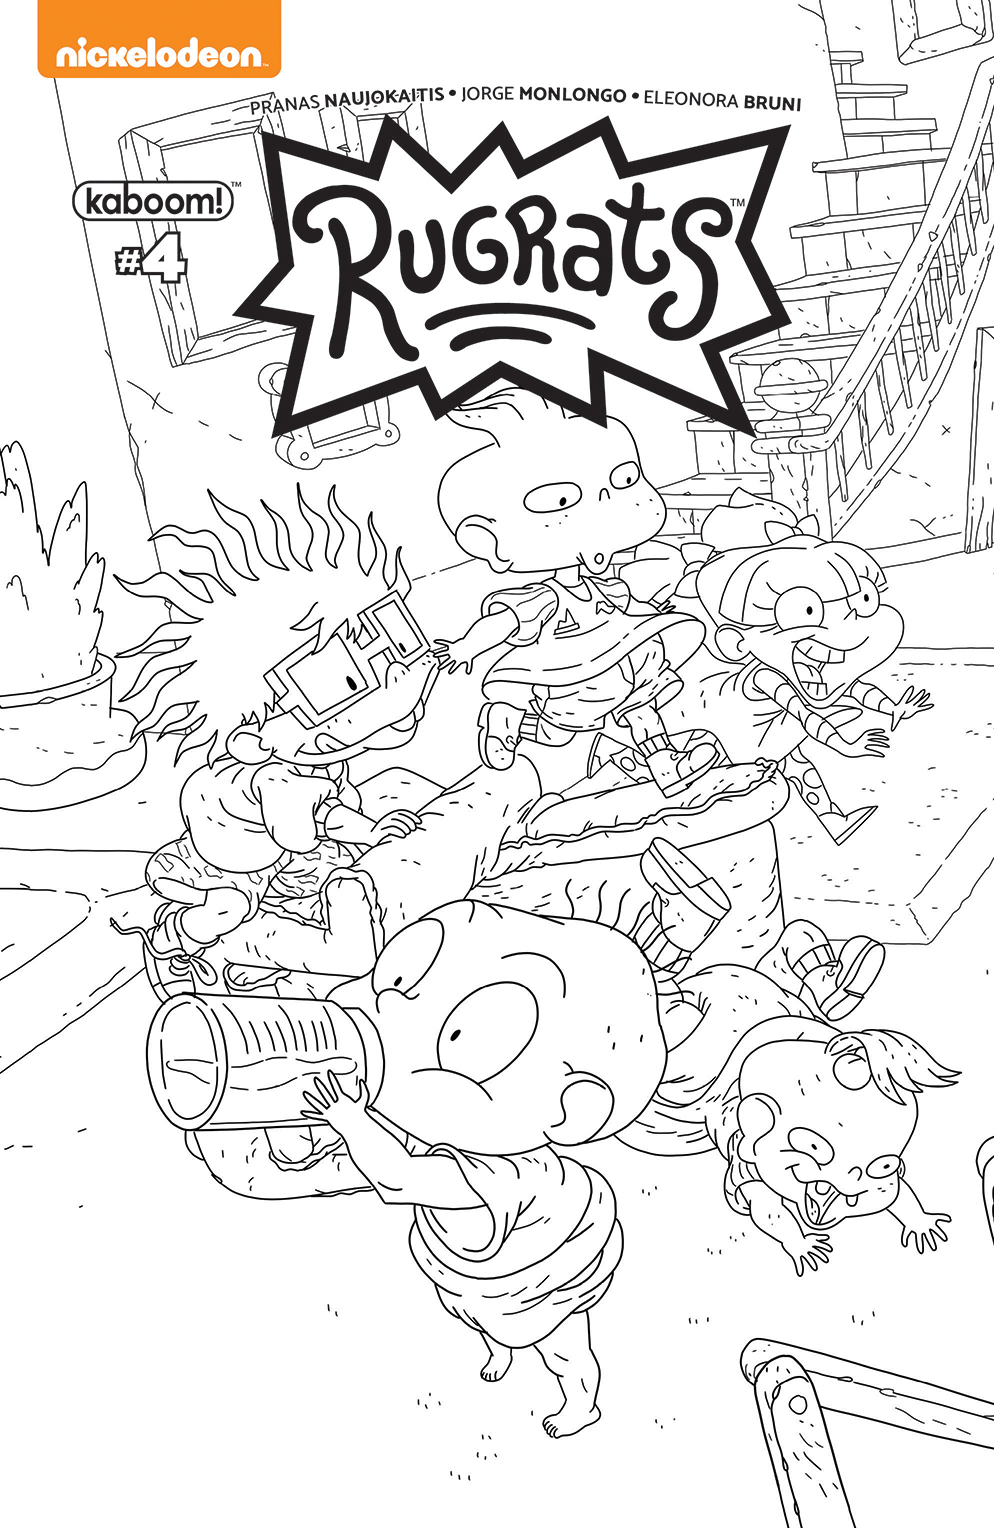 Rugrats_004_C_ConnectingColoring